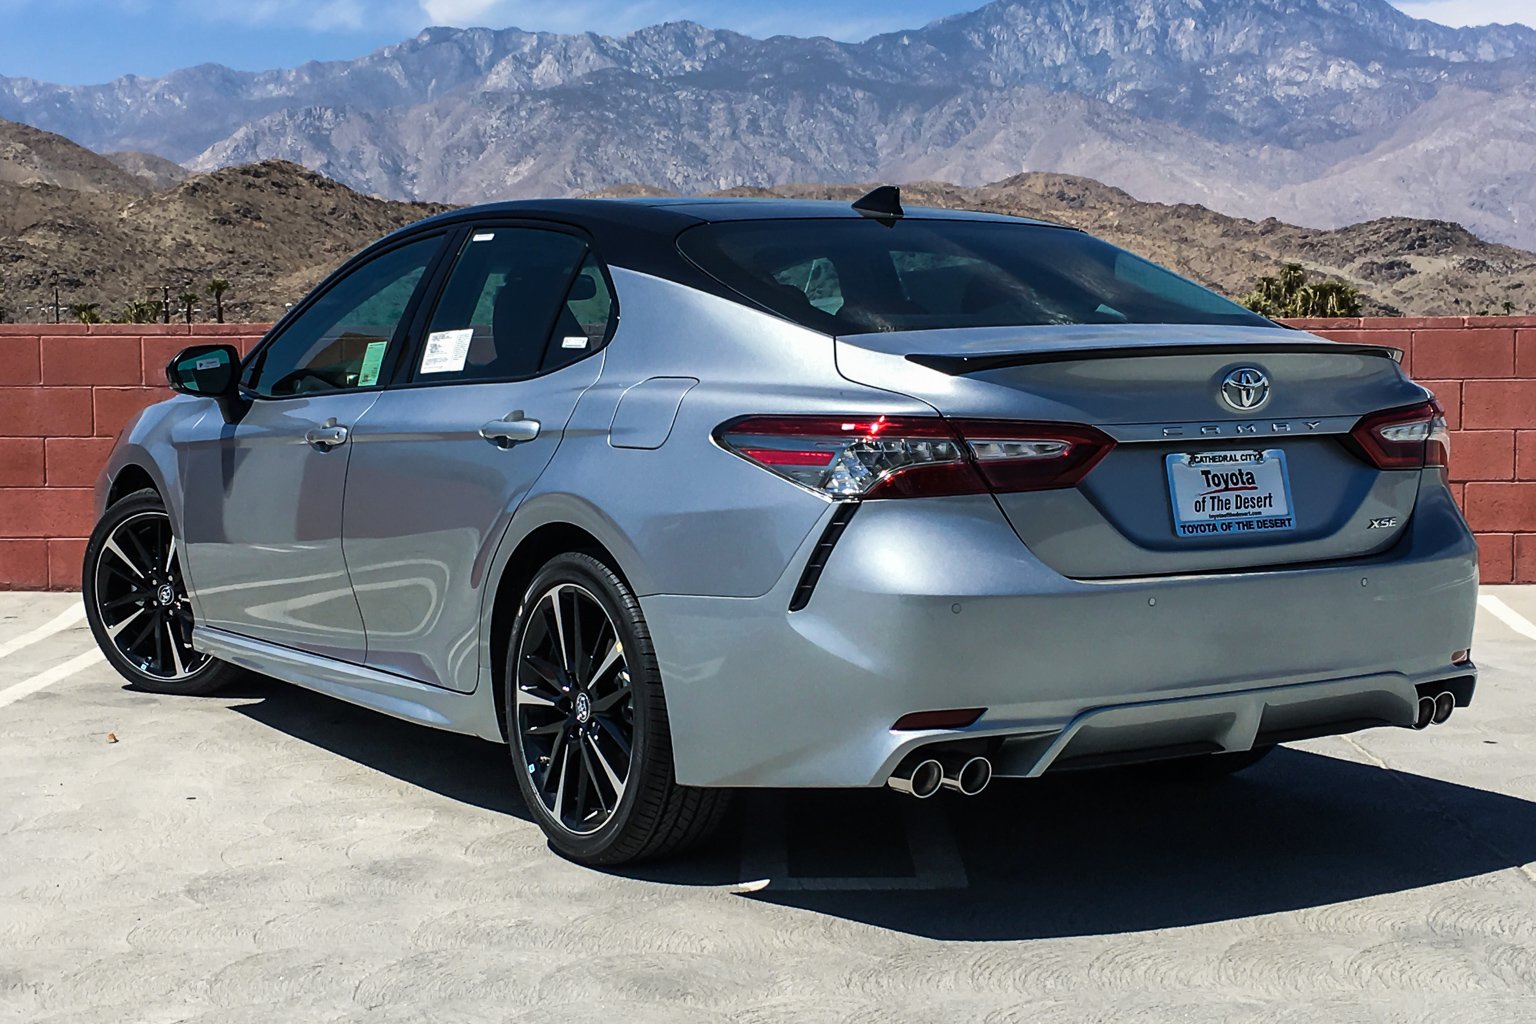 New 2019 Toyota Camry XSE V6 4dr Car in Cathedral City #238037 | Toyota